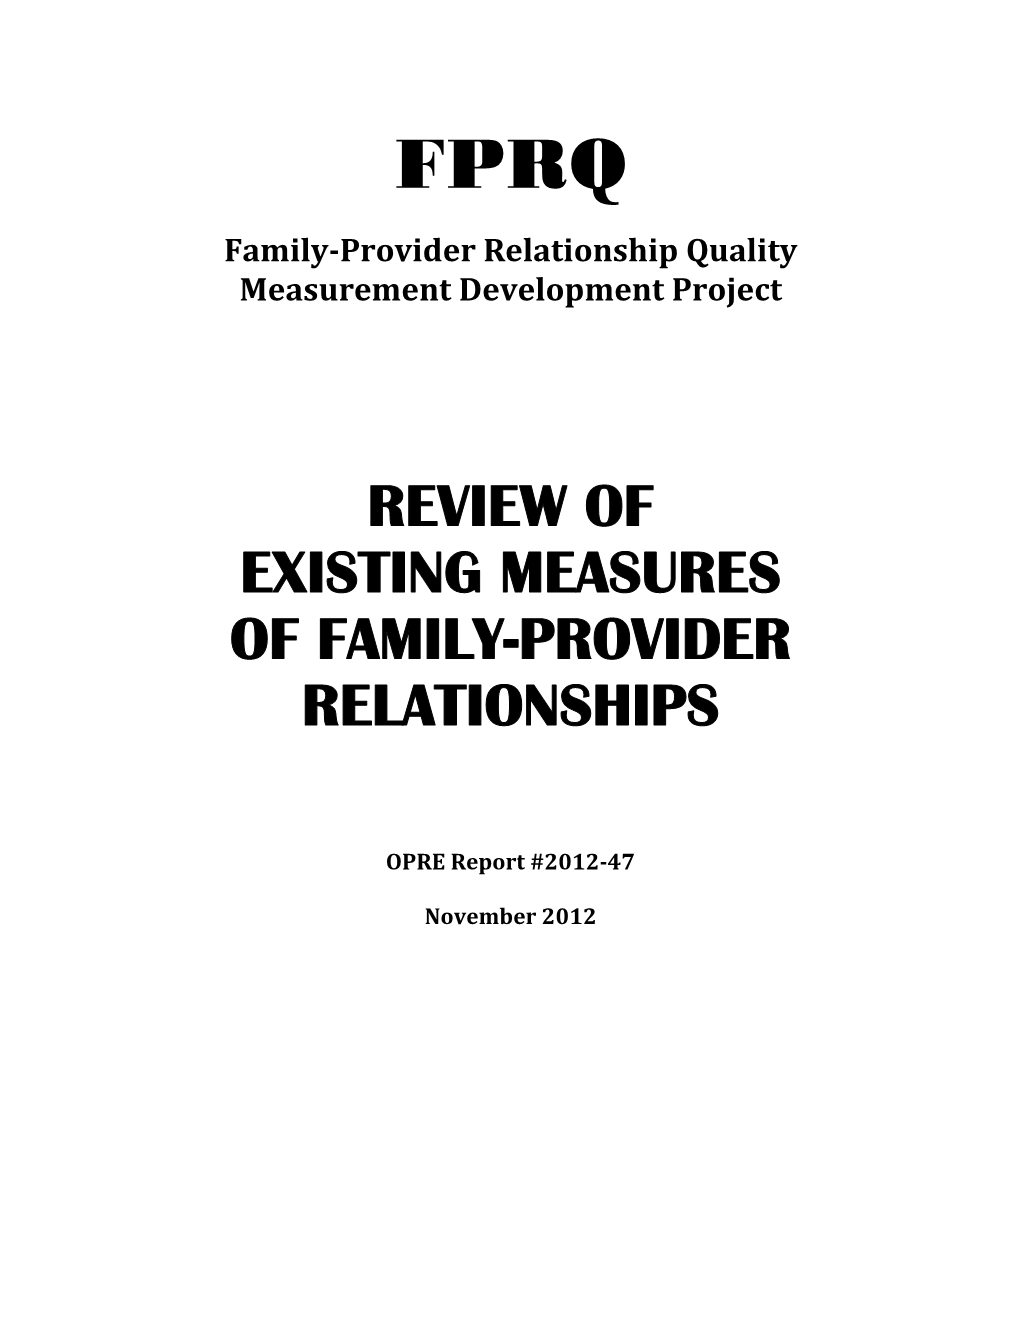 FPRQ Review of Measures